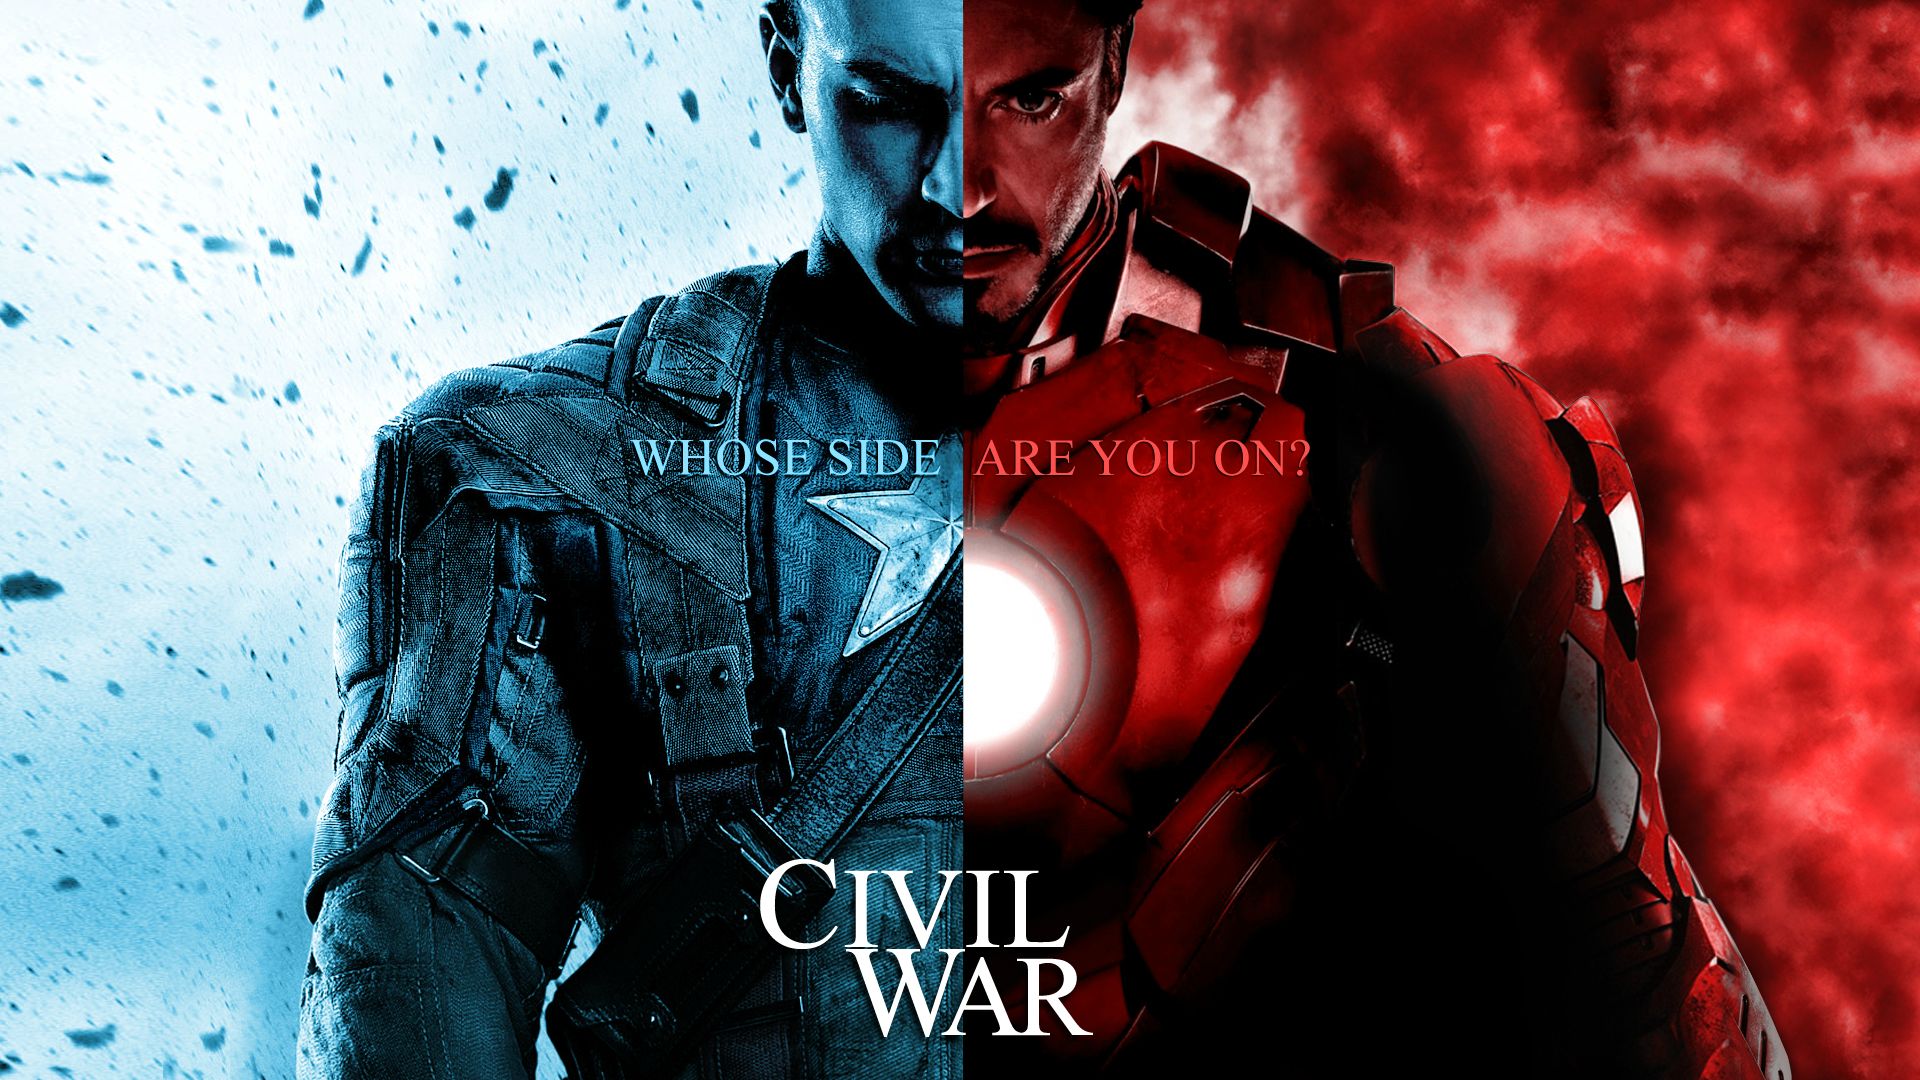 h20wkj2-iron-man-vs-captain-america-who-sides-with-who-in-marvel-s-civil-war